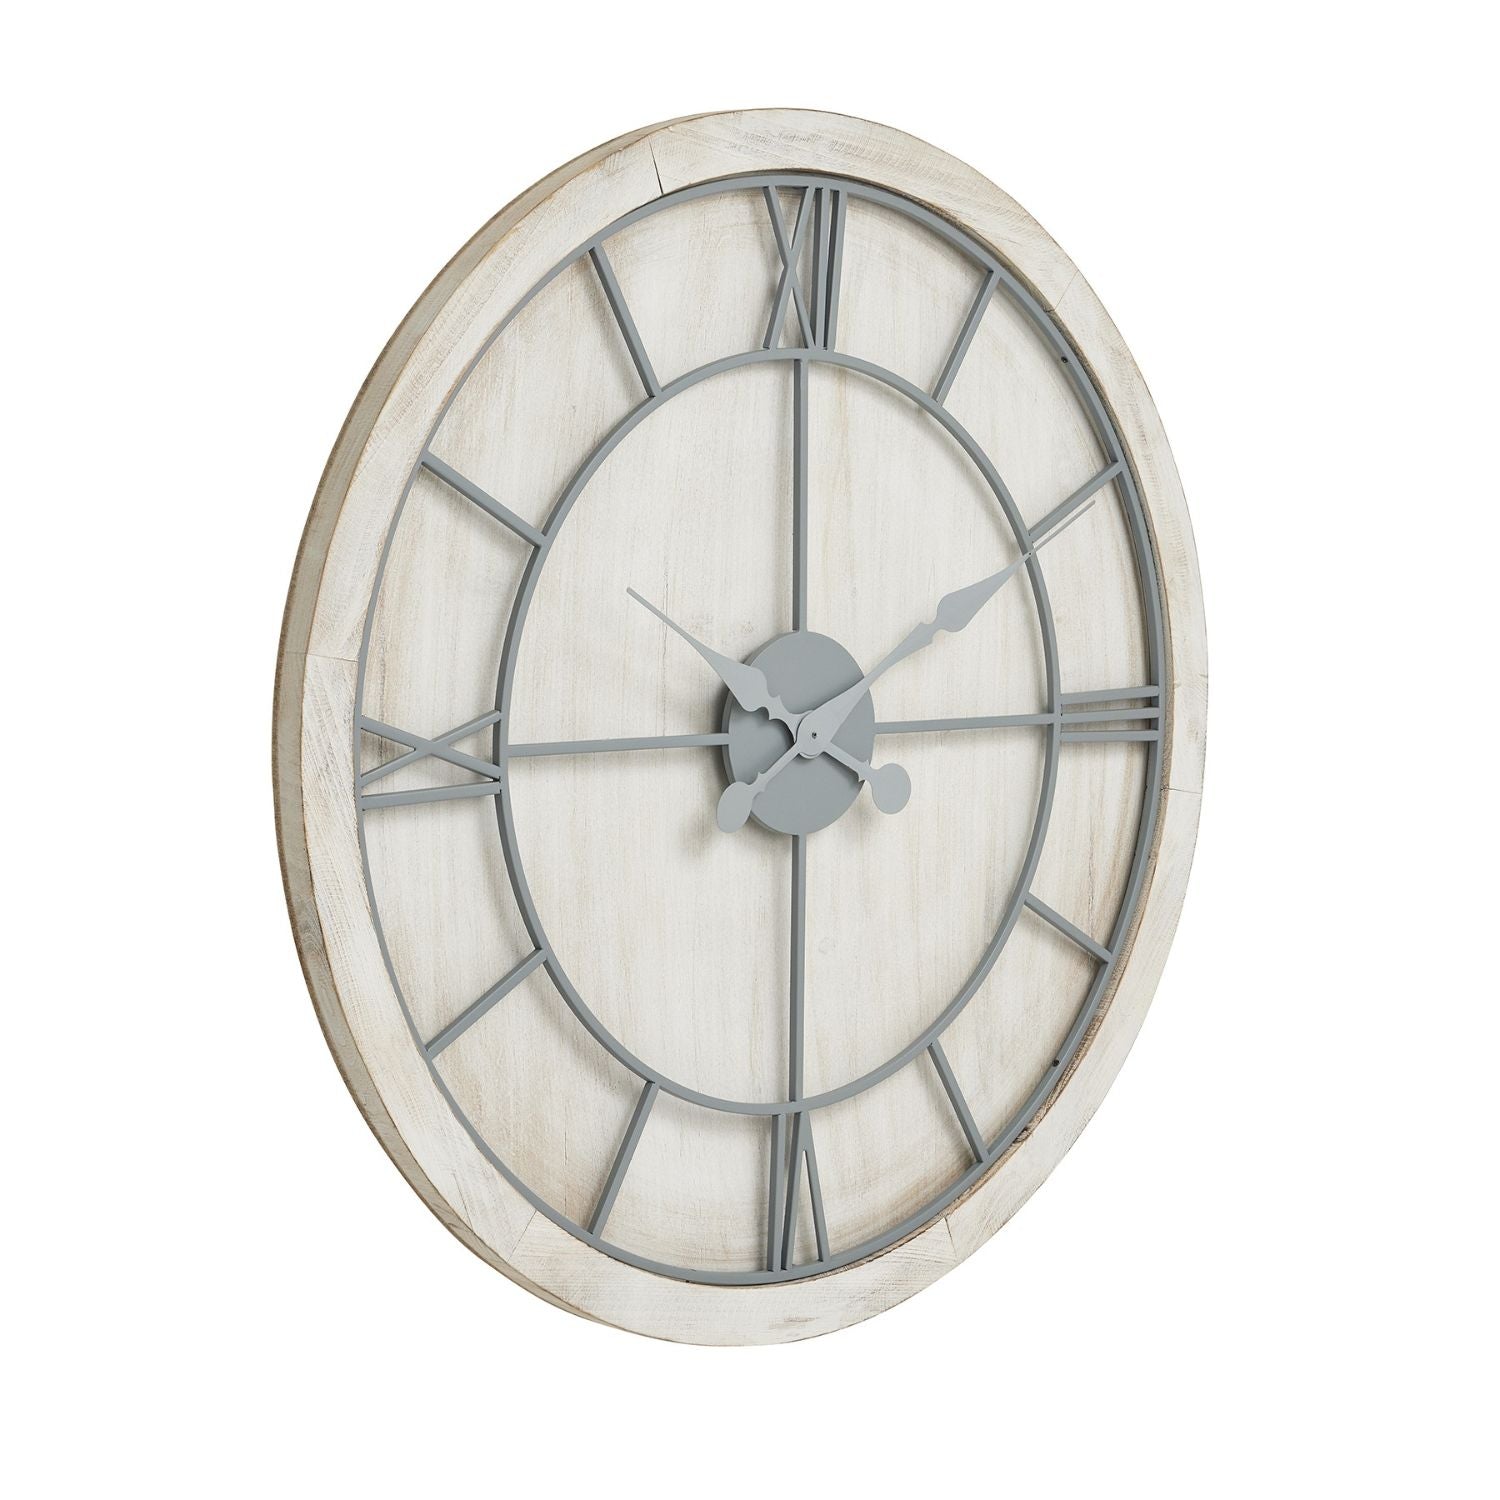 Large circular white wall clock with grey metal roman numerals and hands